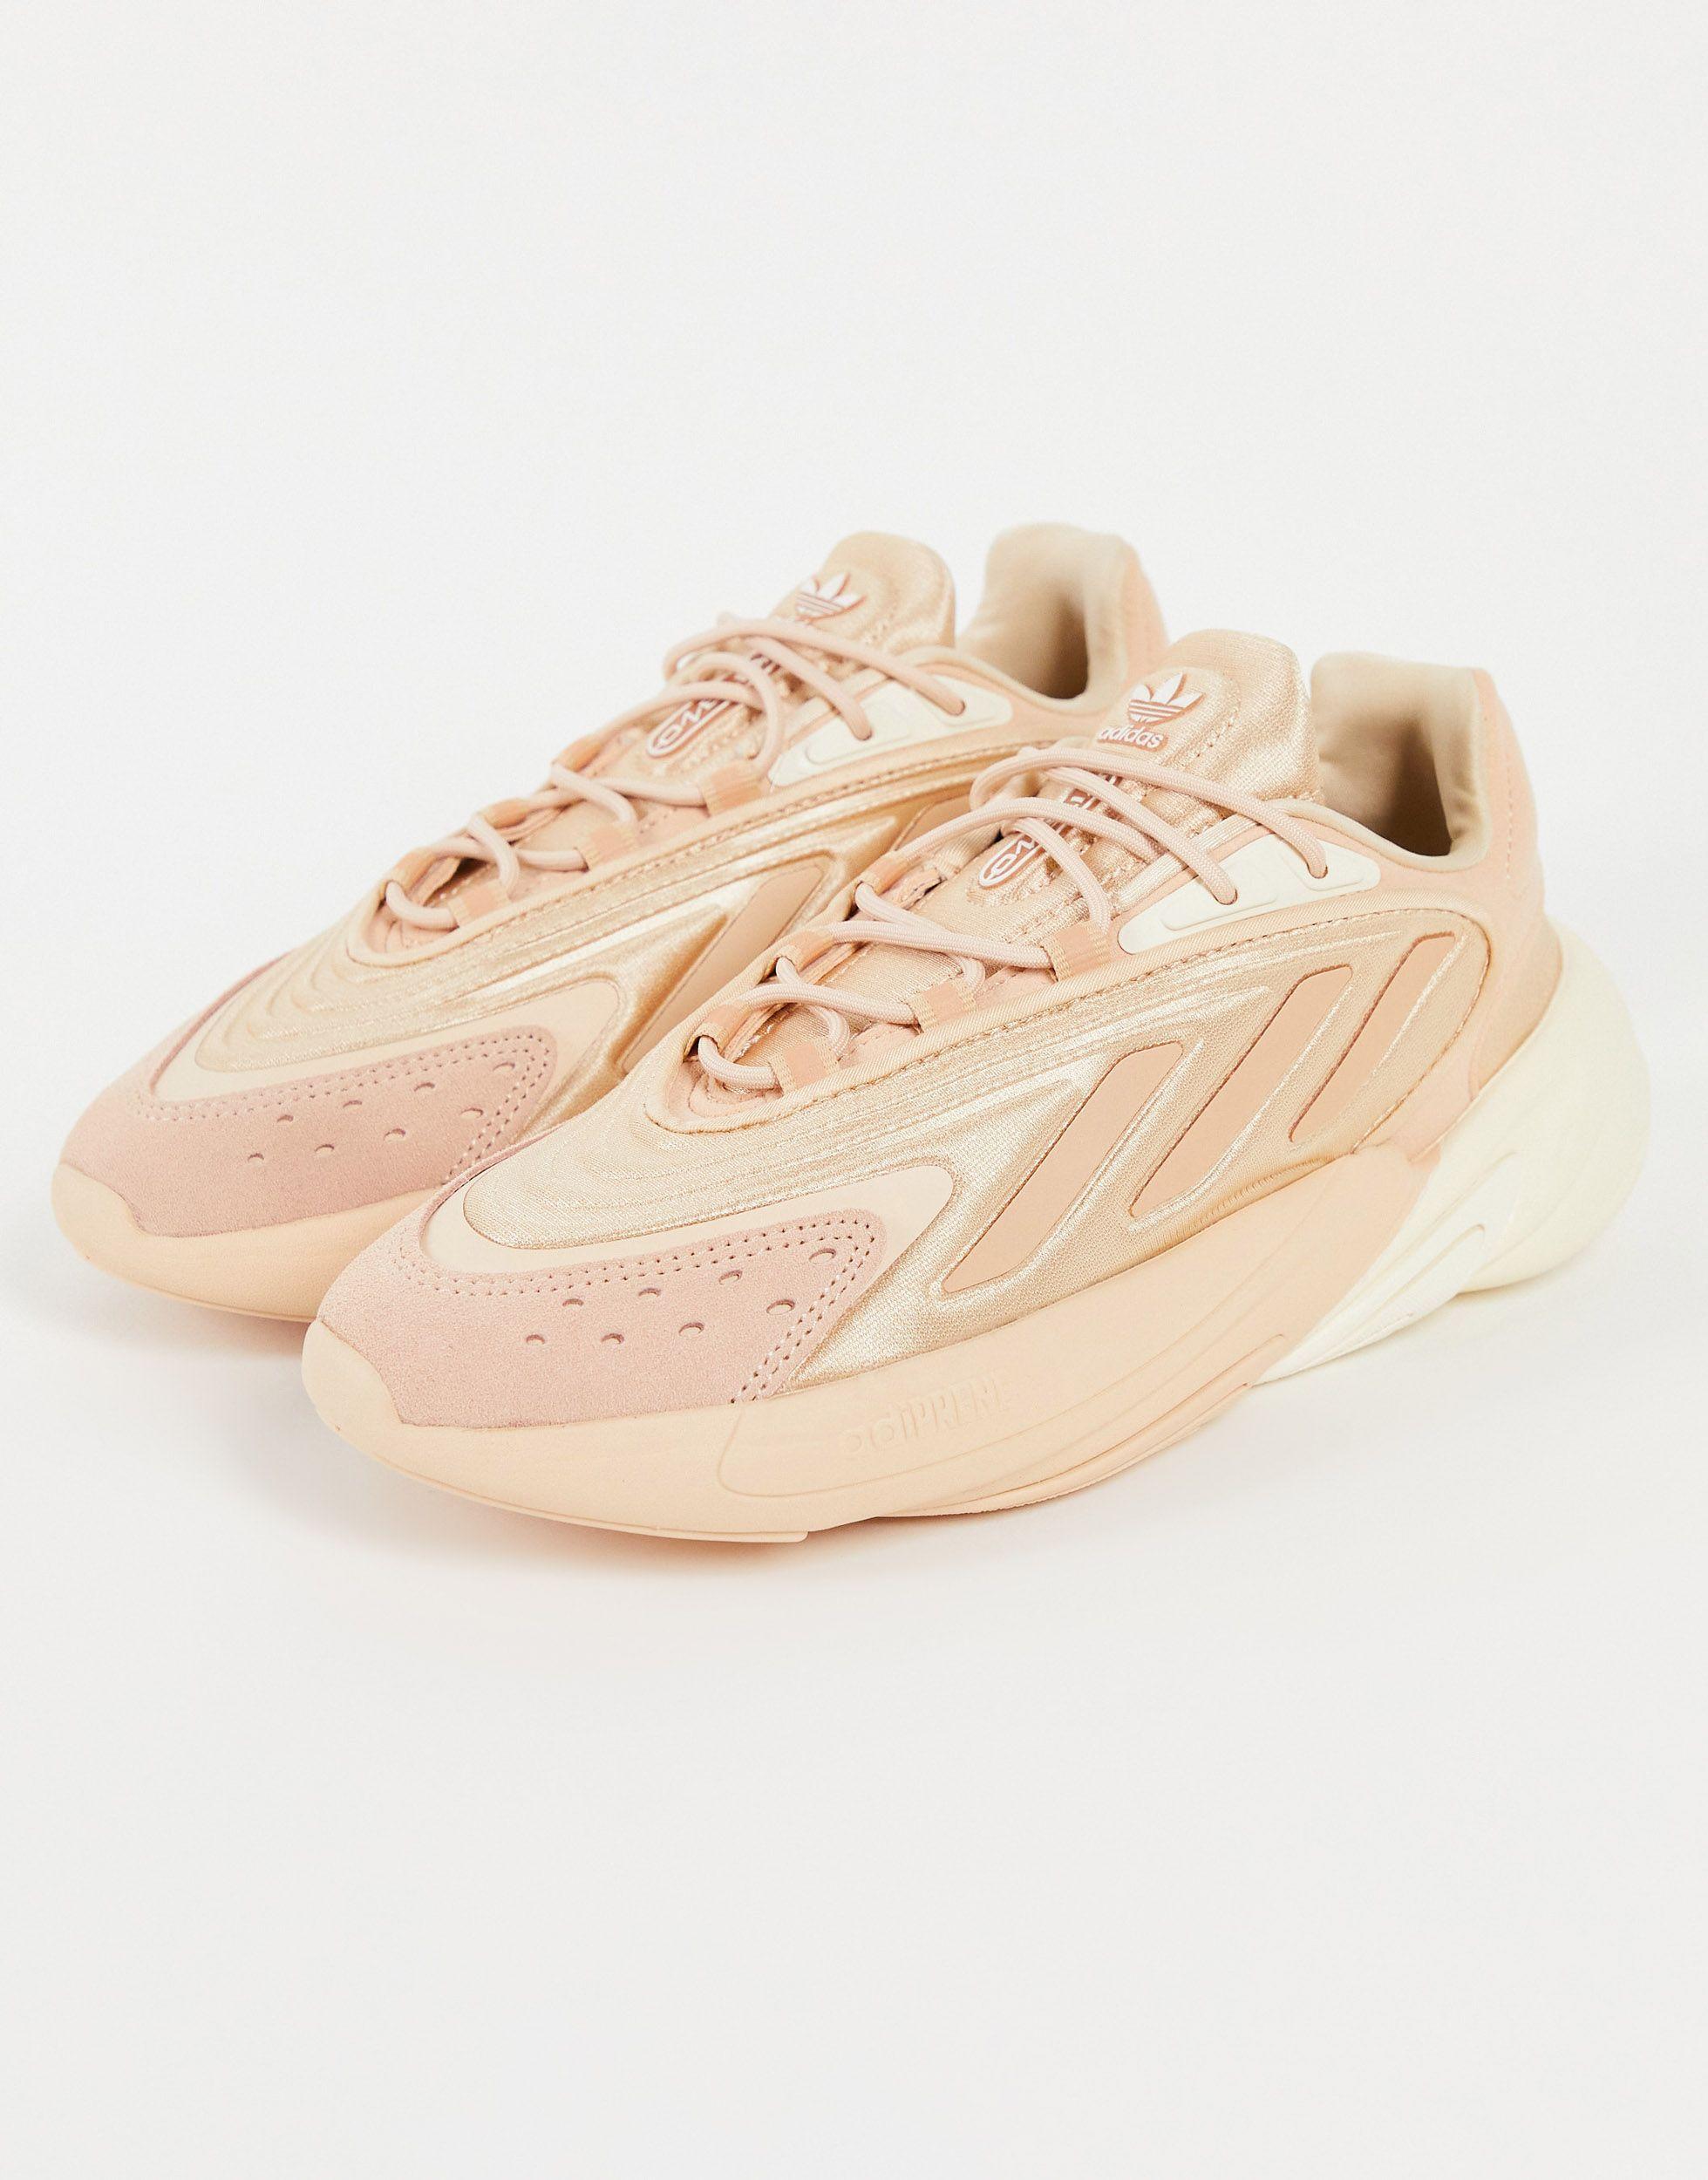 adidas Originals Ozelia Trainers in Natural | Lyst